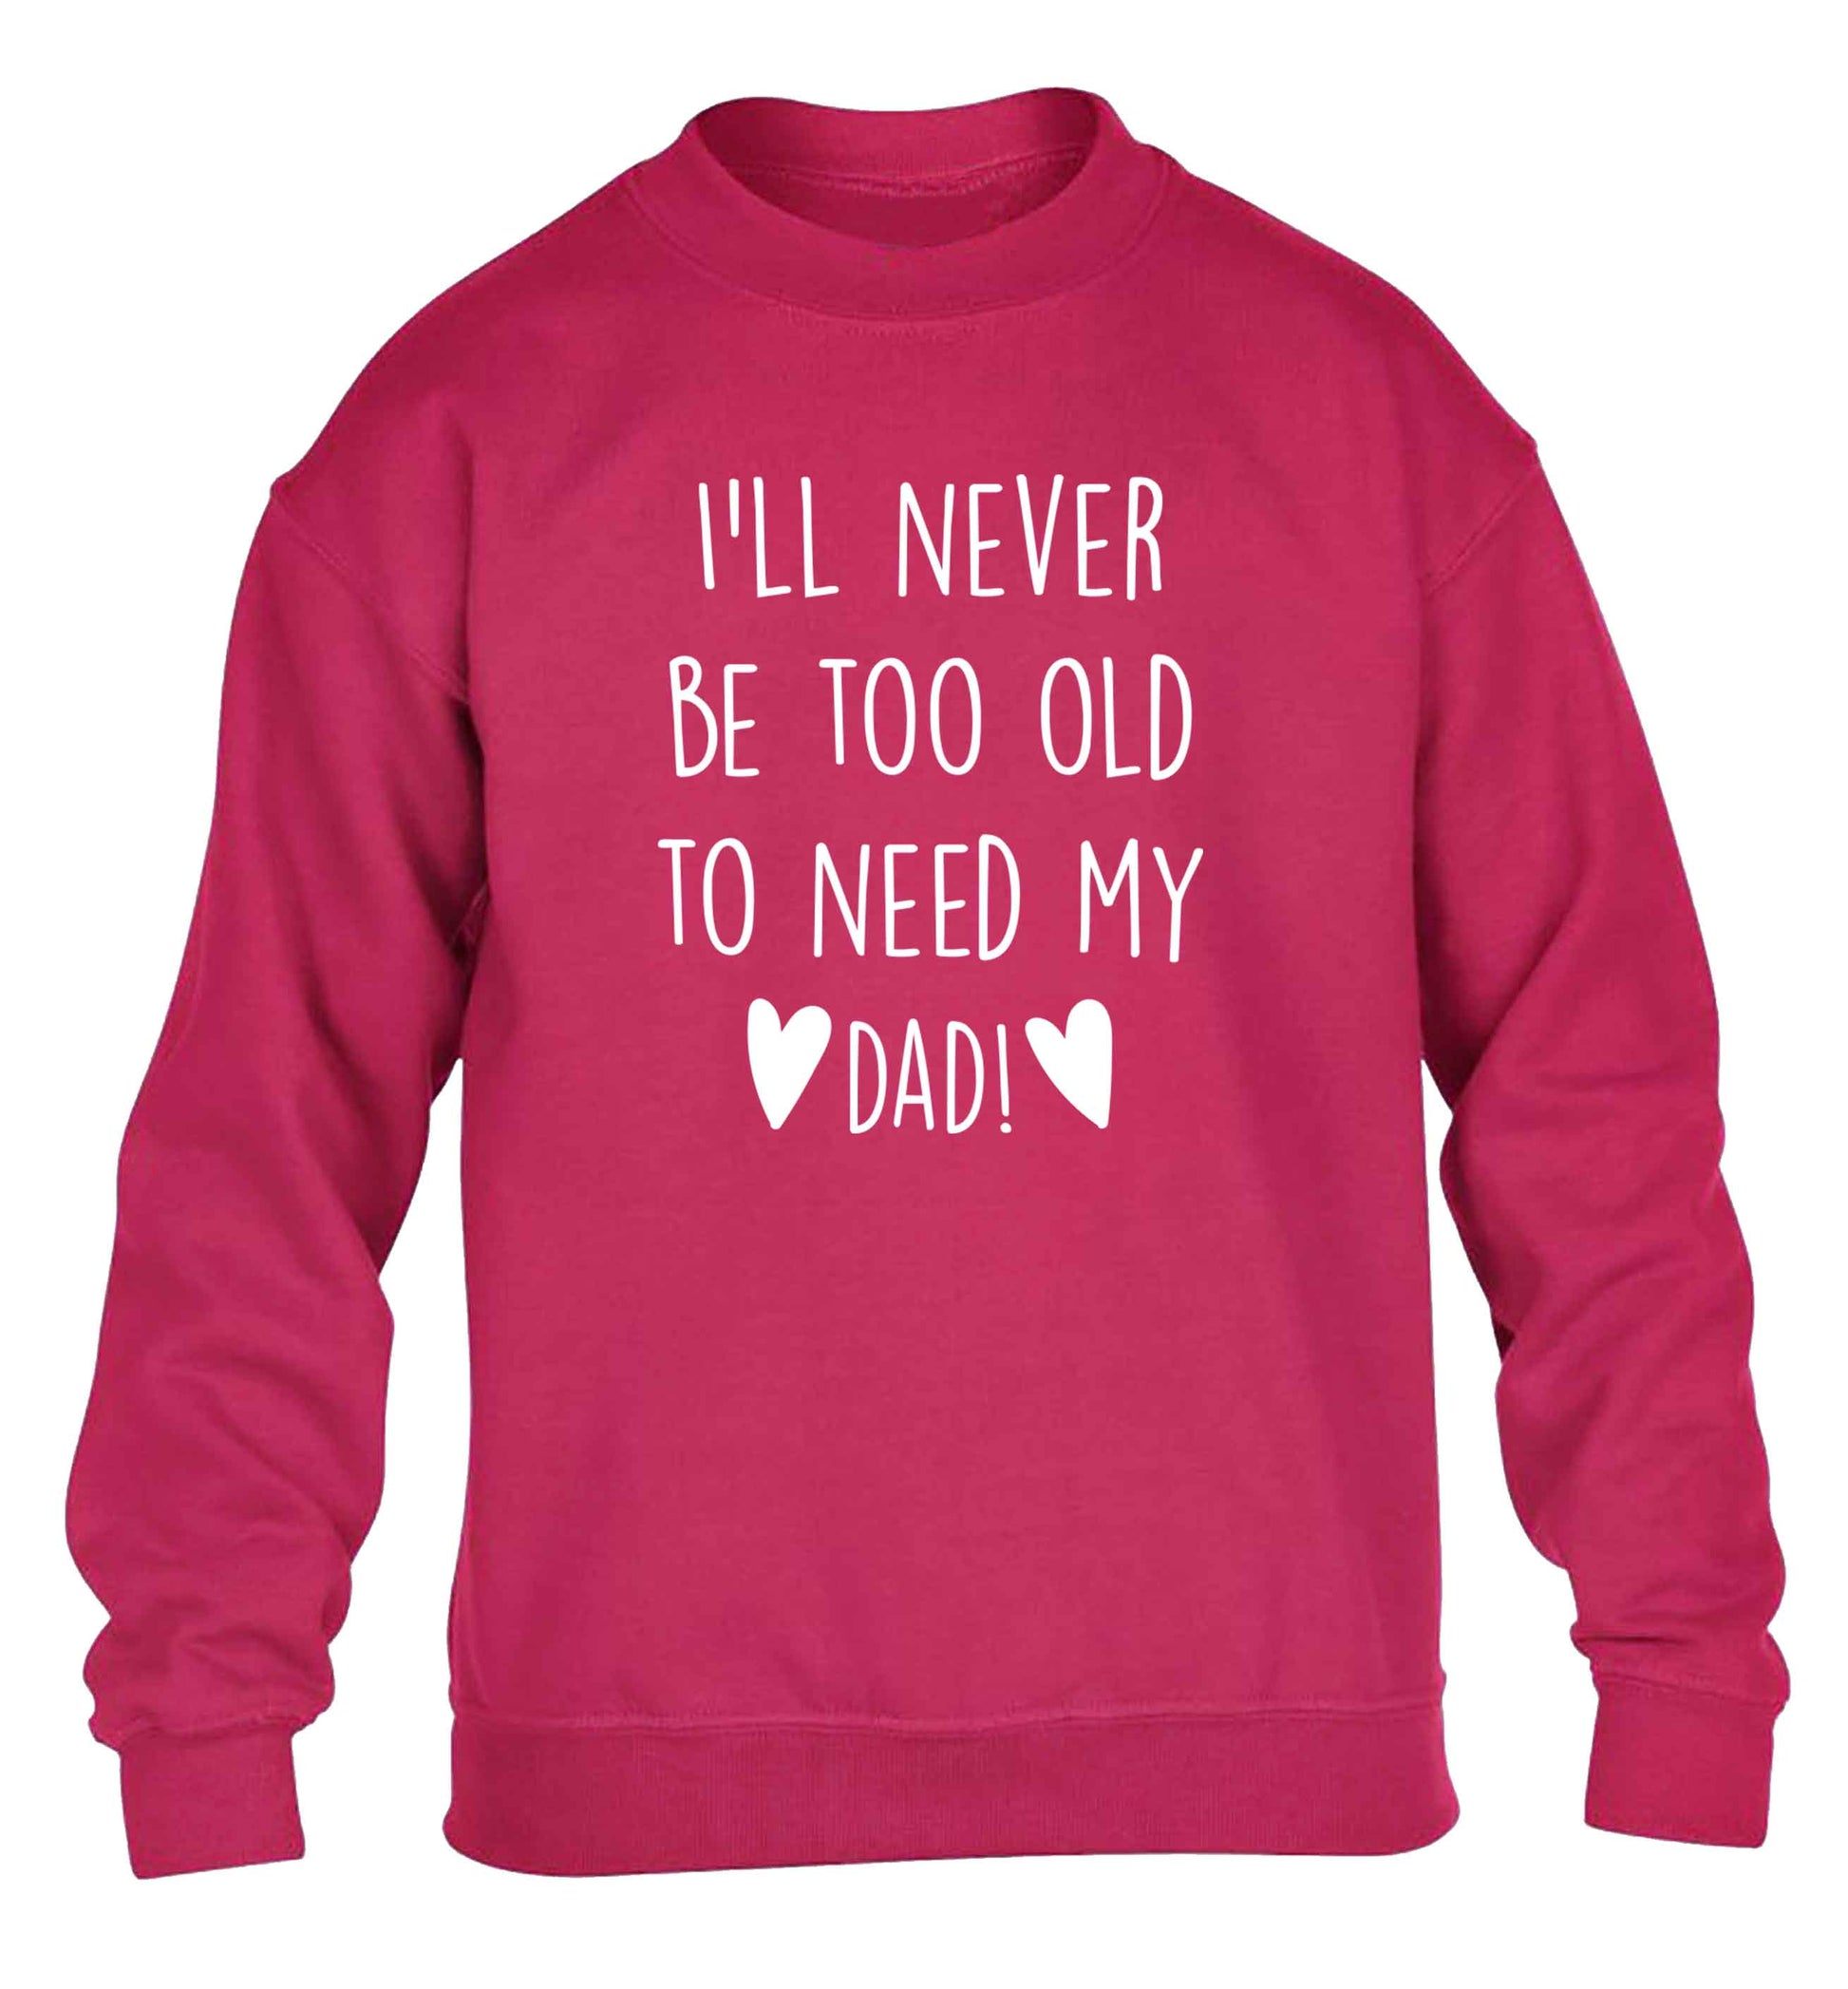 I'll never be too old to need my dad children's pink sweater 12-13 Years